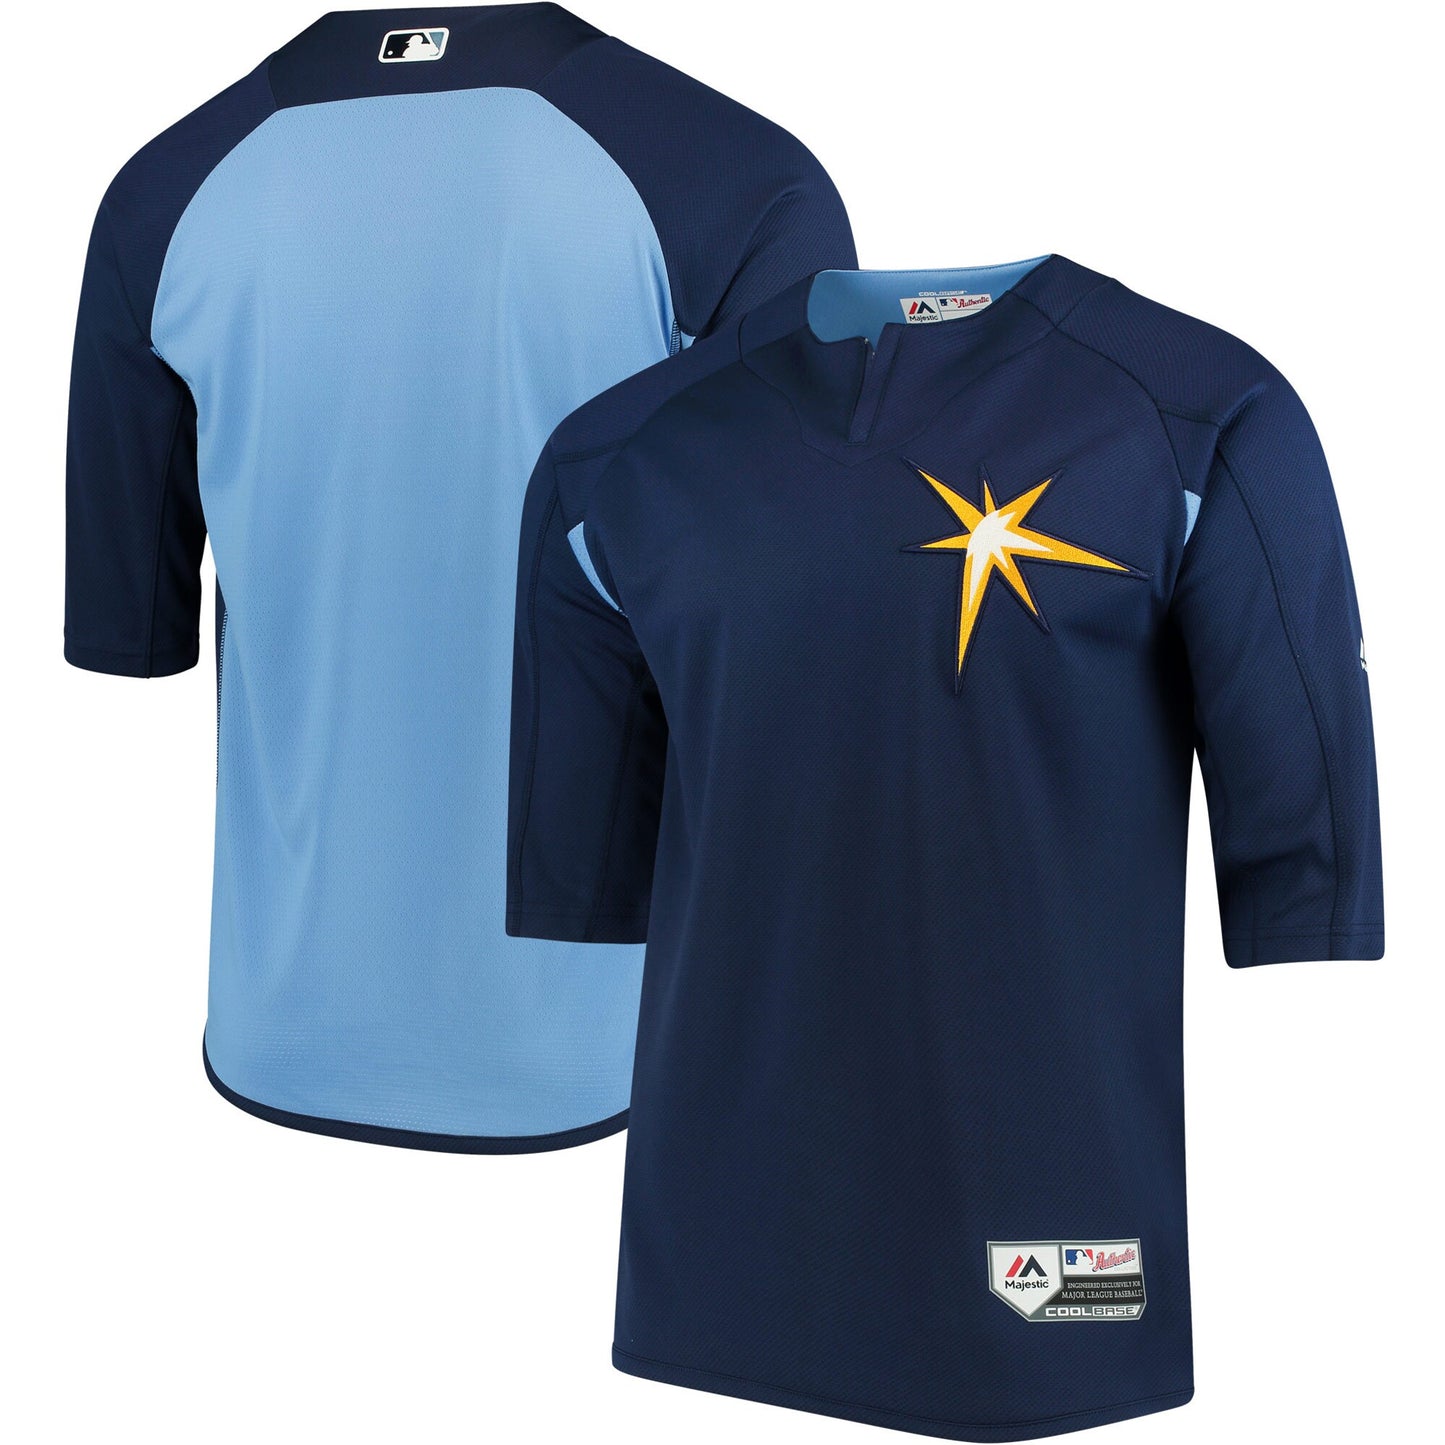 Tampa Bay Rays Majestic Authentic Collection On-Field 3/4-Sleeve Batting Practice Jersey - Navy/Light Blue